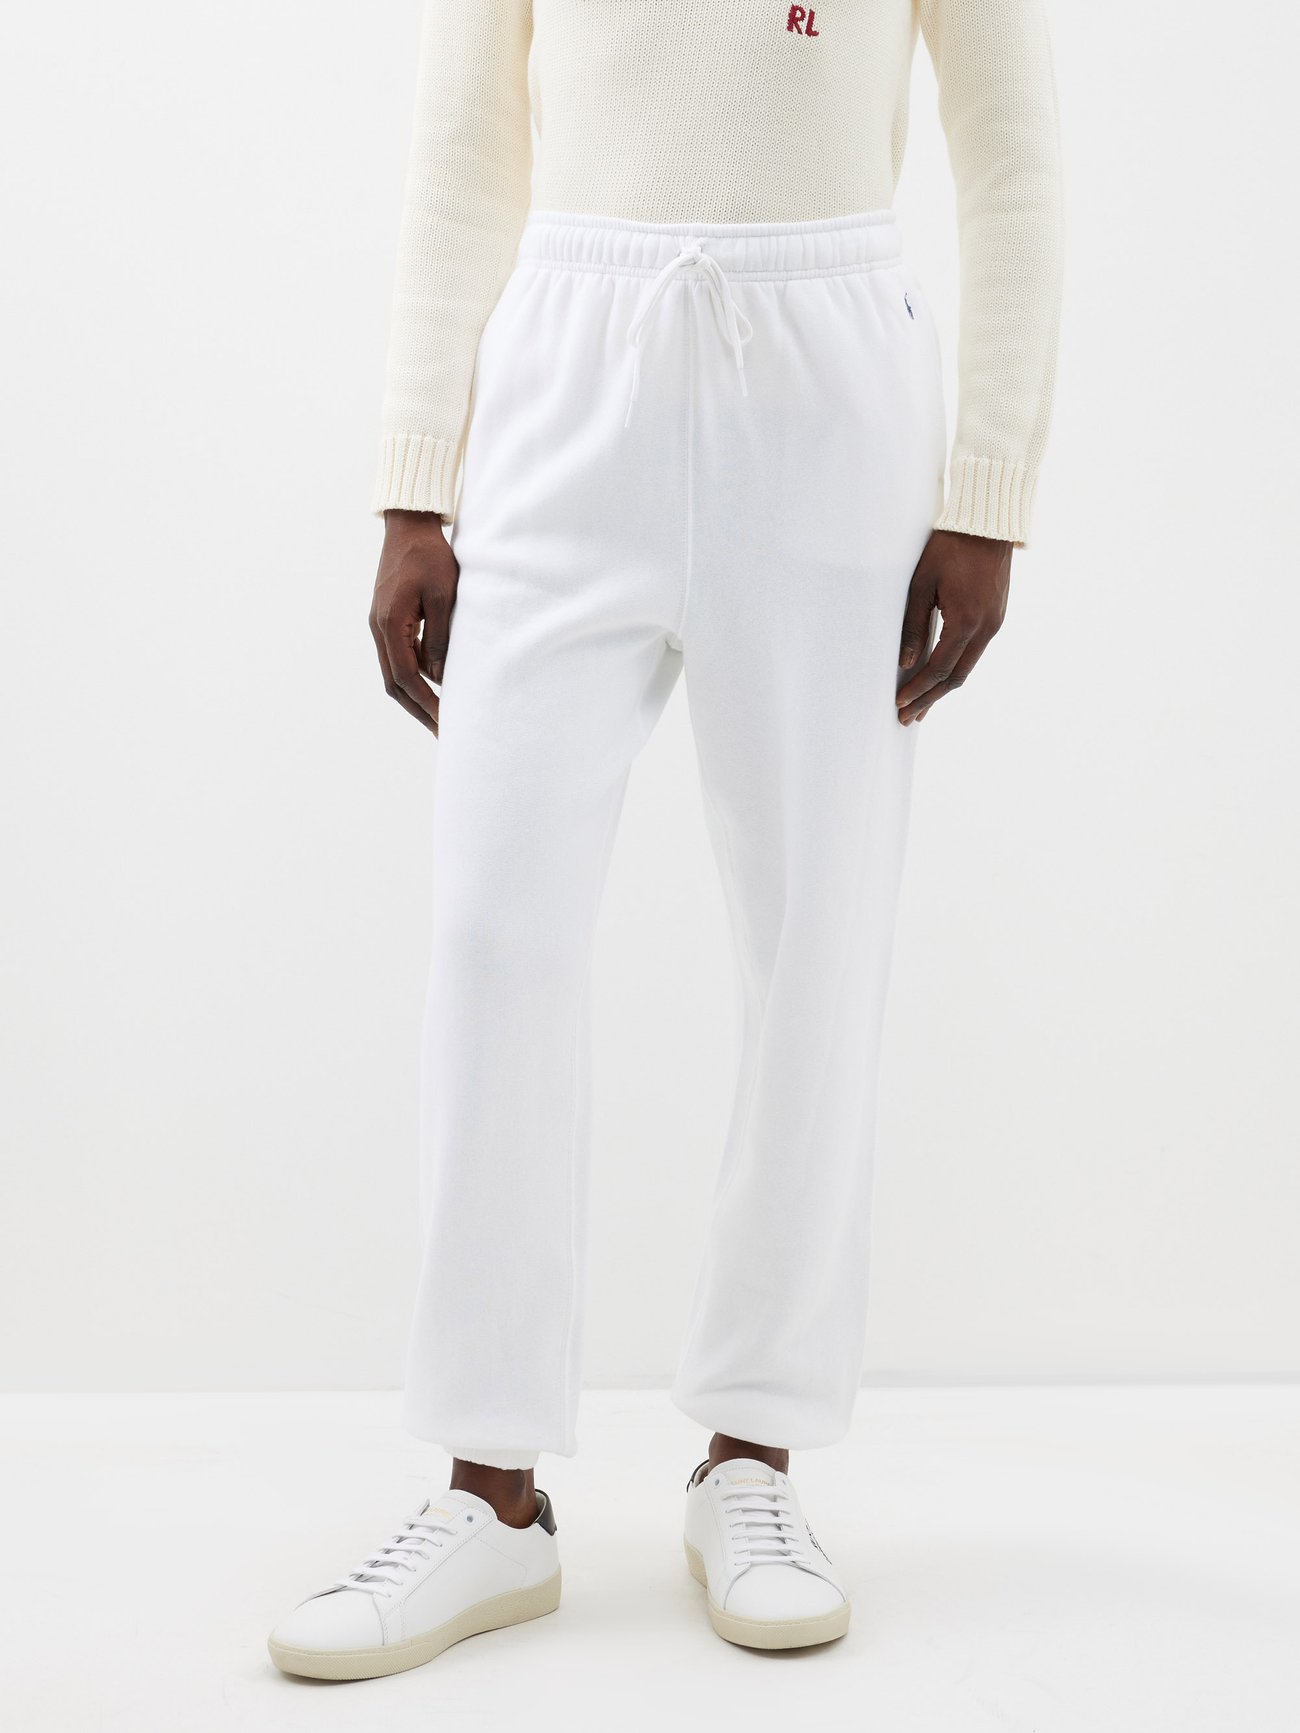 POLO RALPH LAUREN - Women's sporty trousers with iconic embroidery - White  - 211891560001